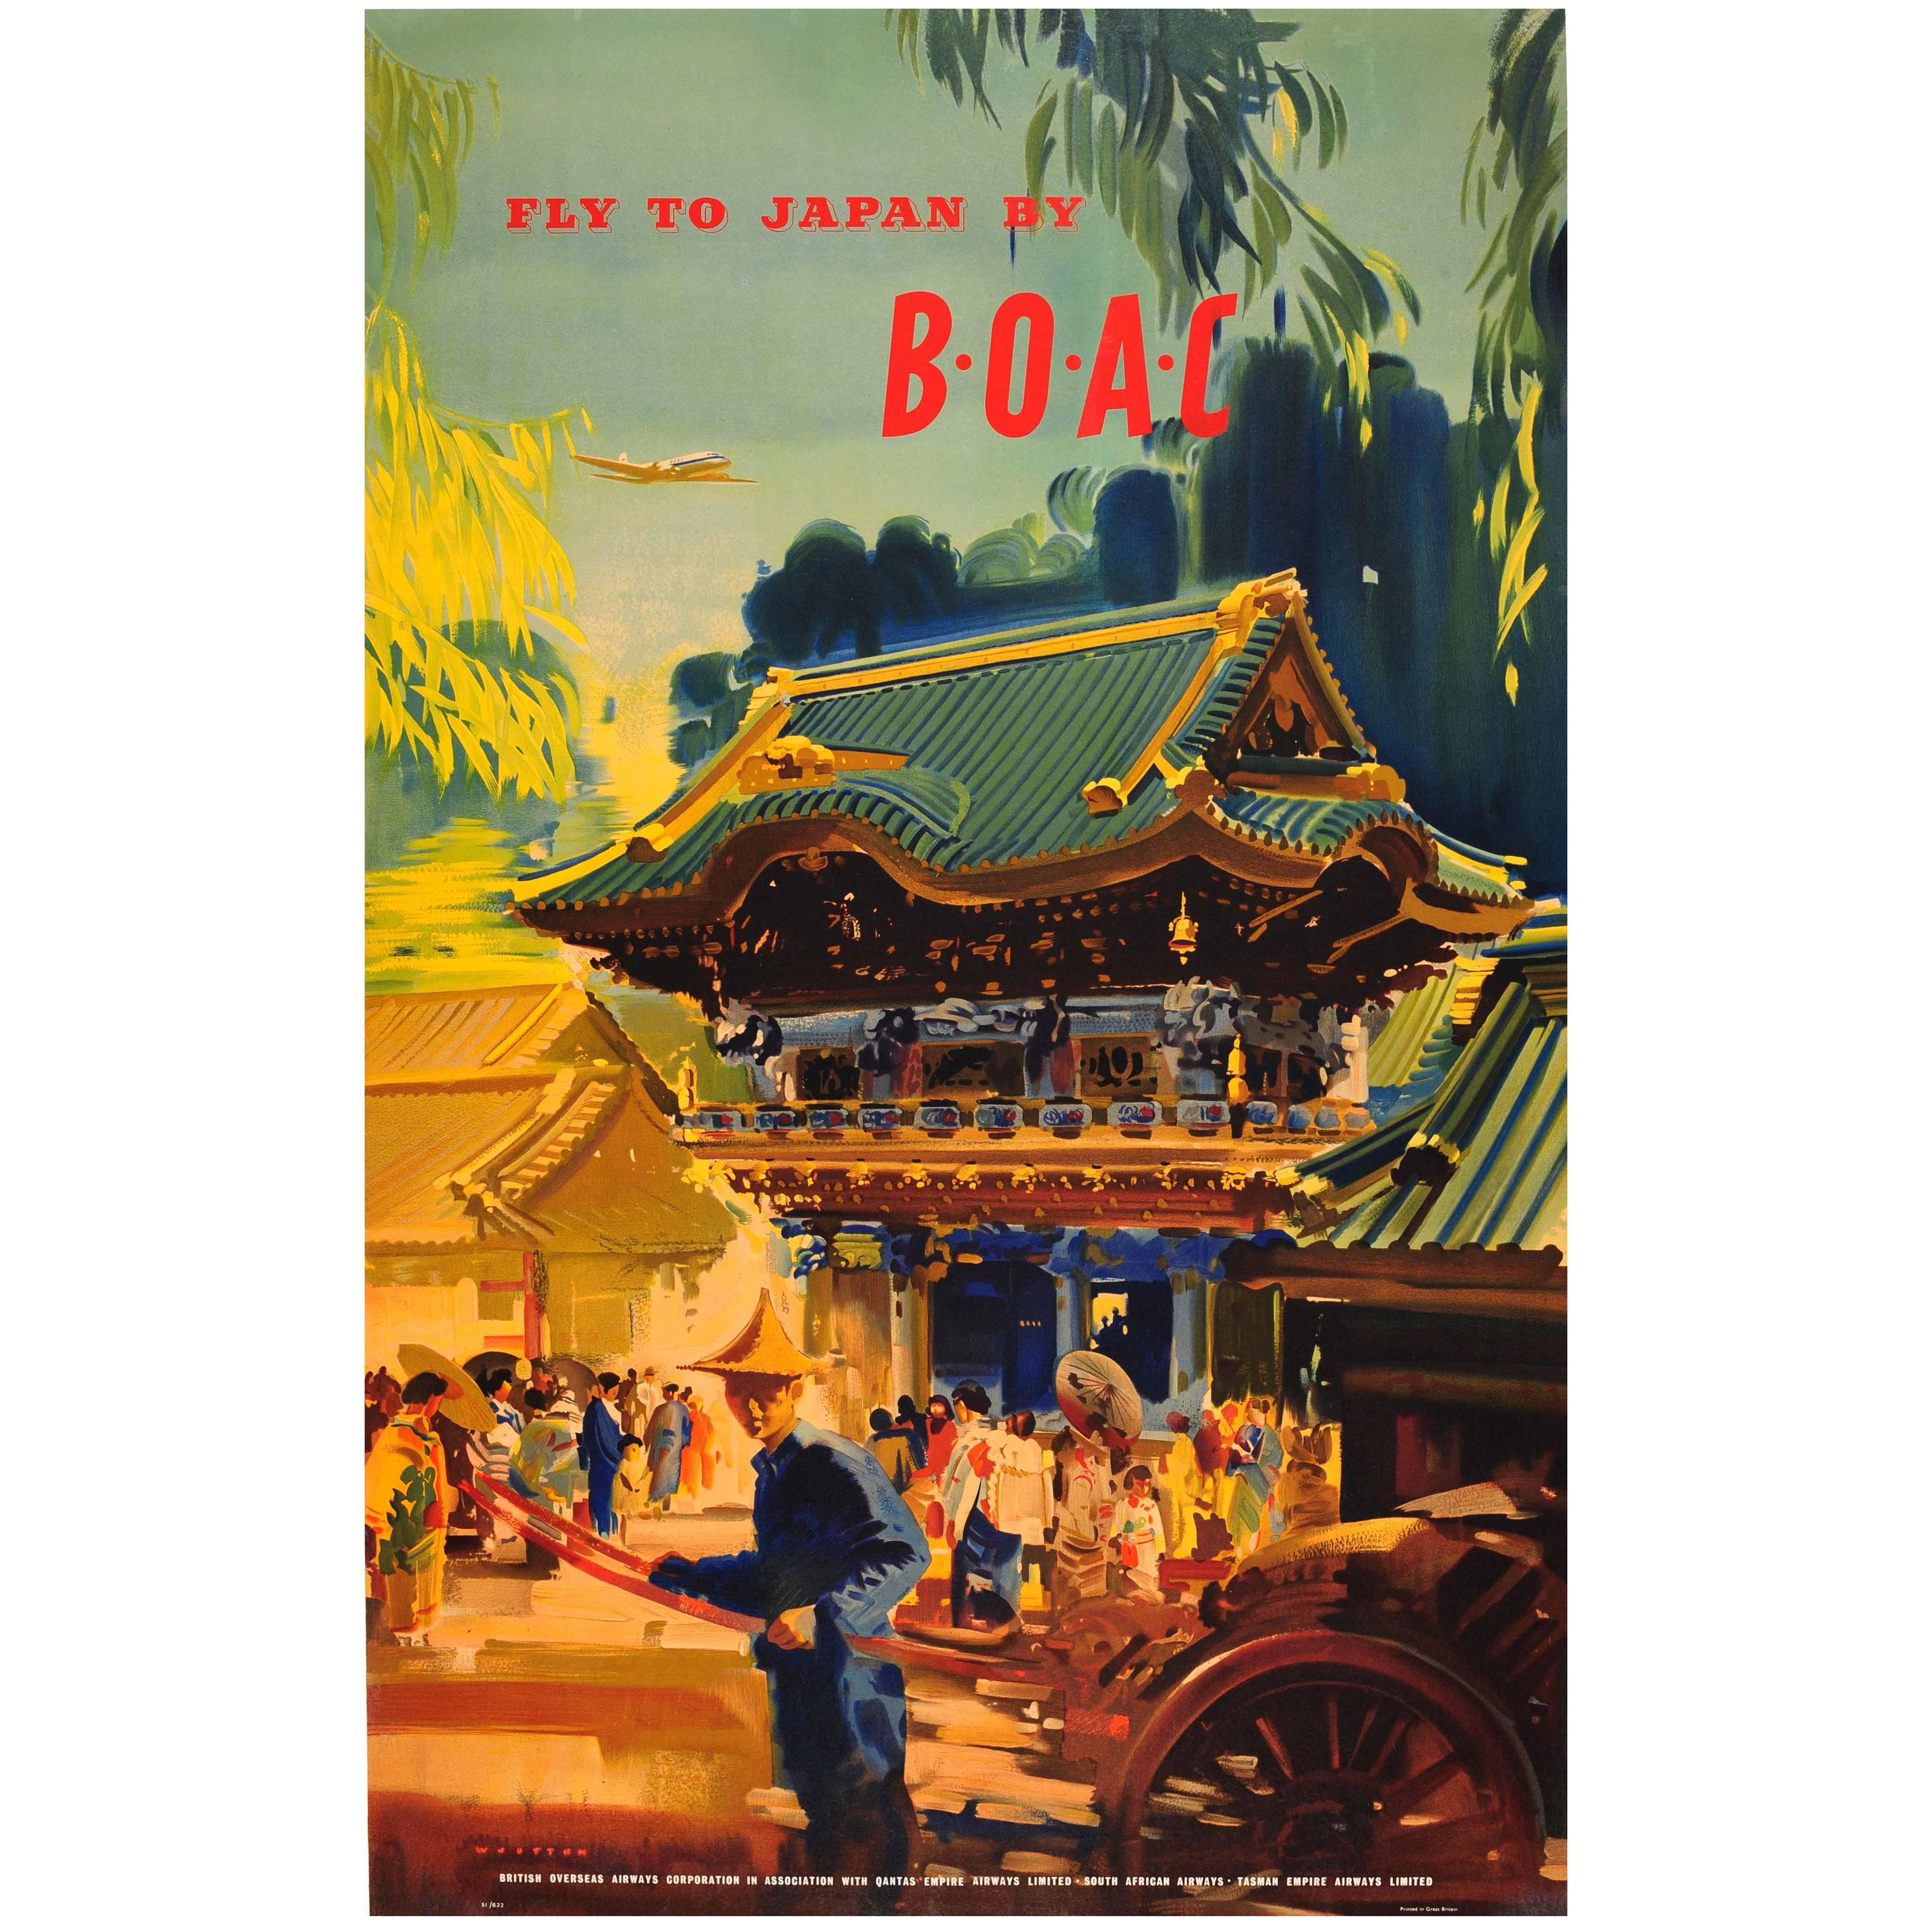 Original Vintage Travel Advertising Poster by Wootton - Fly to Japan by BOAC